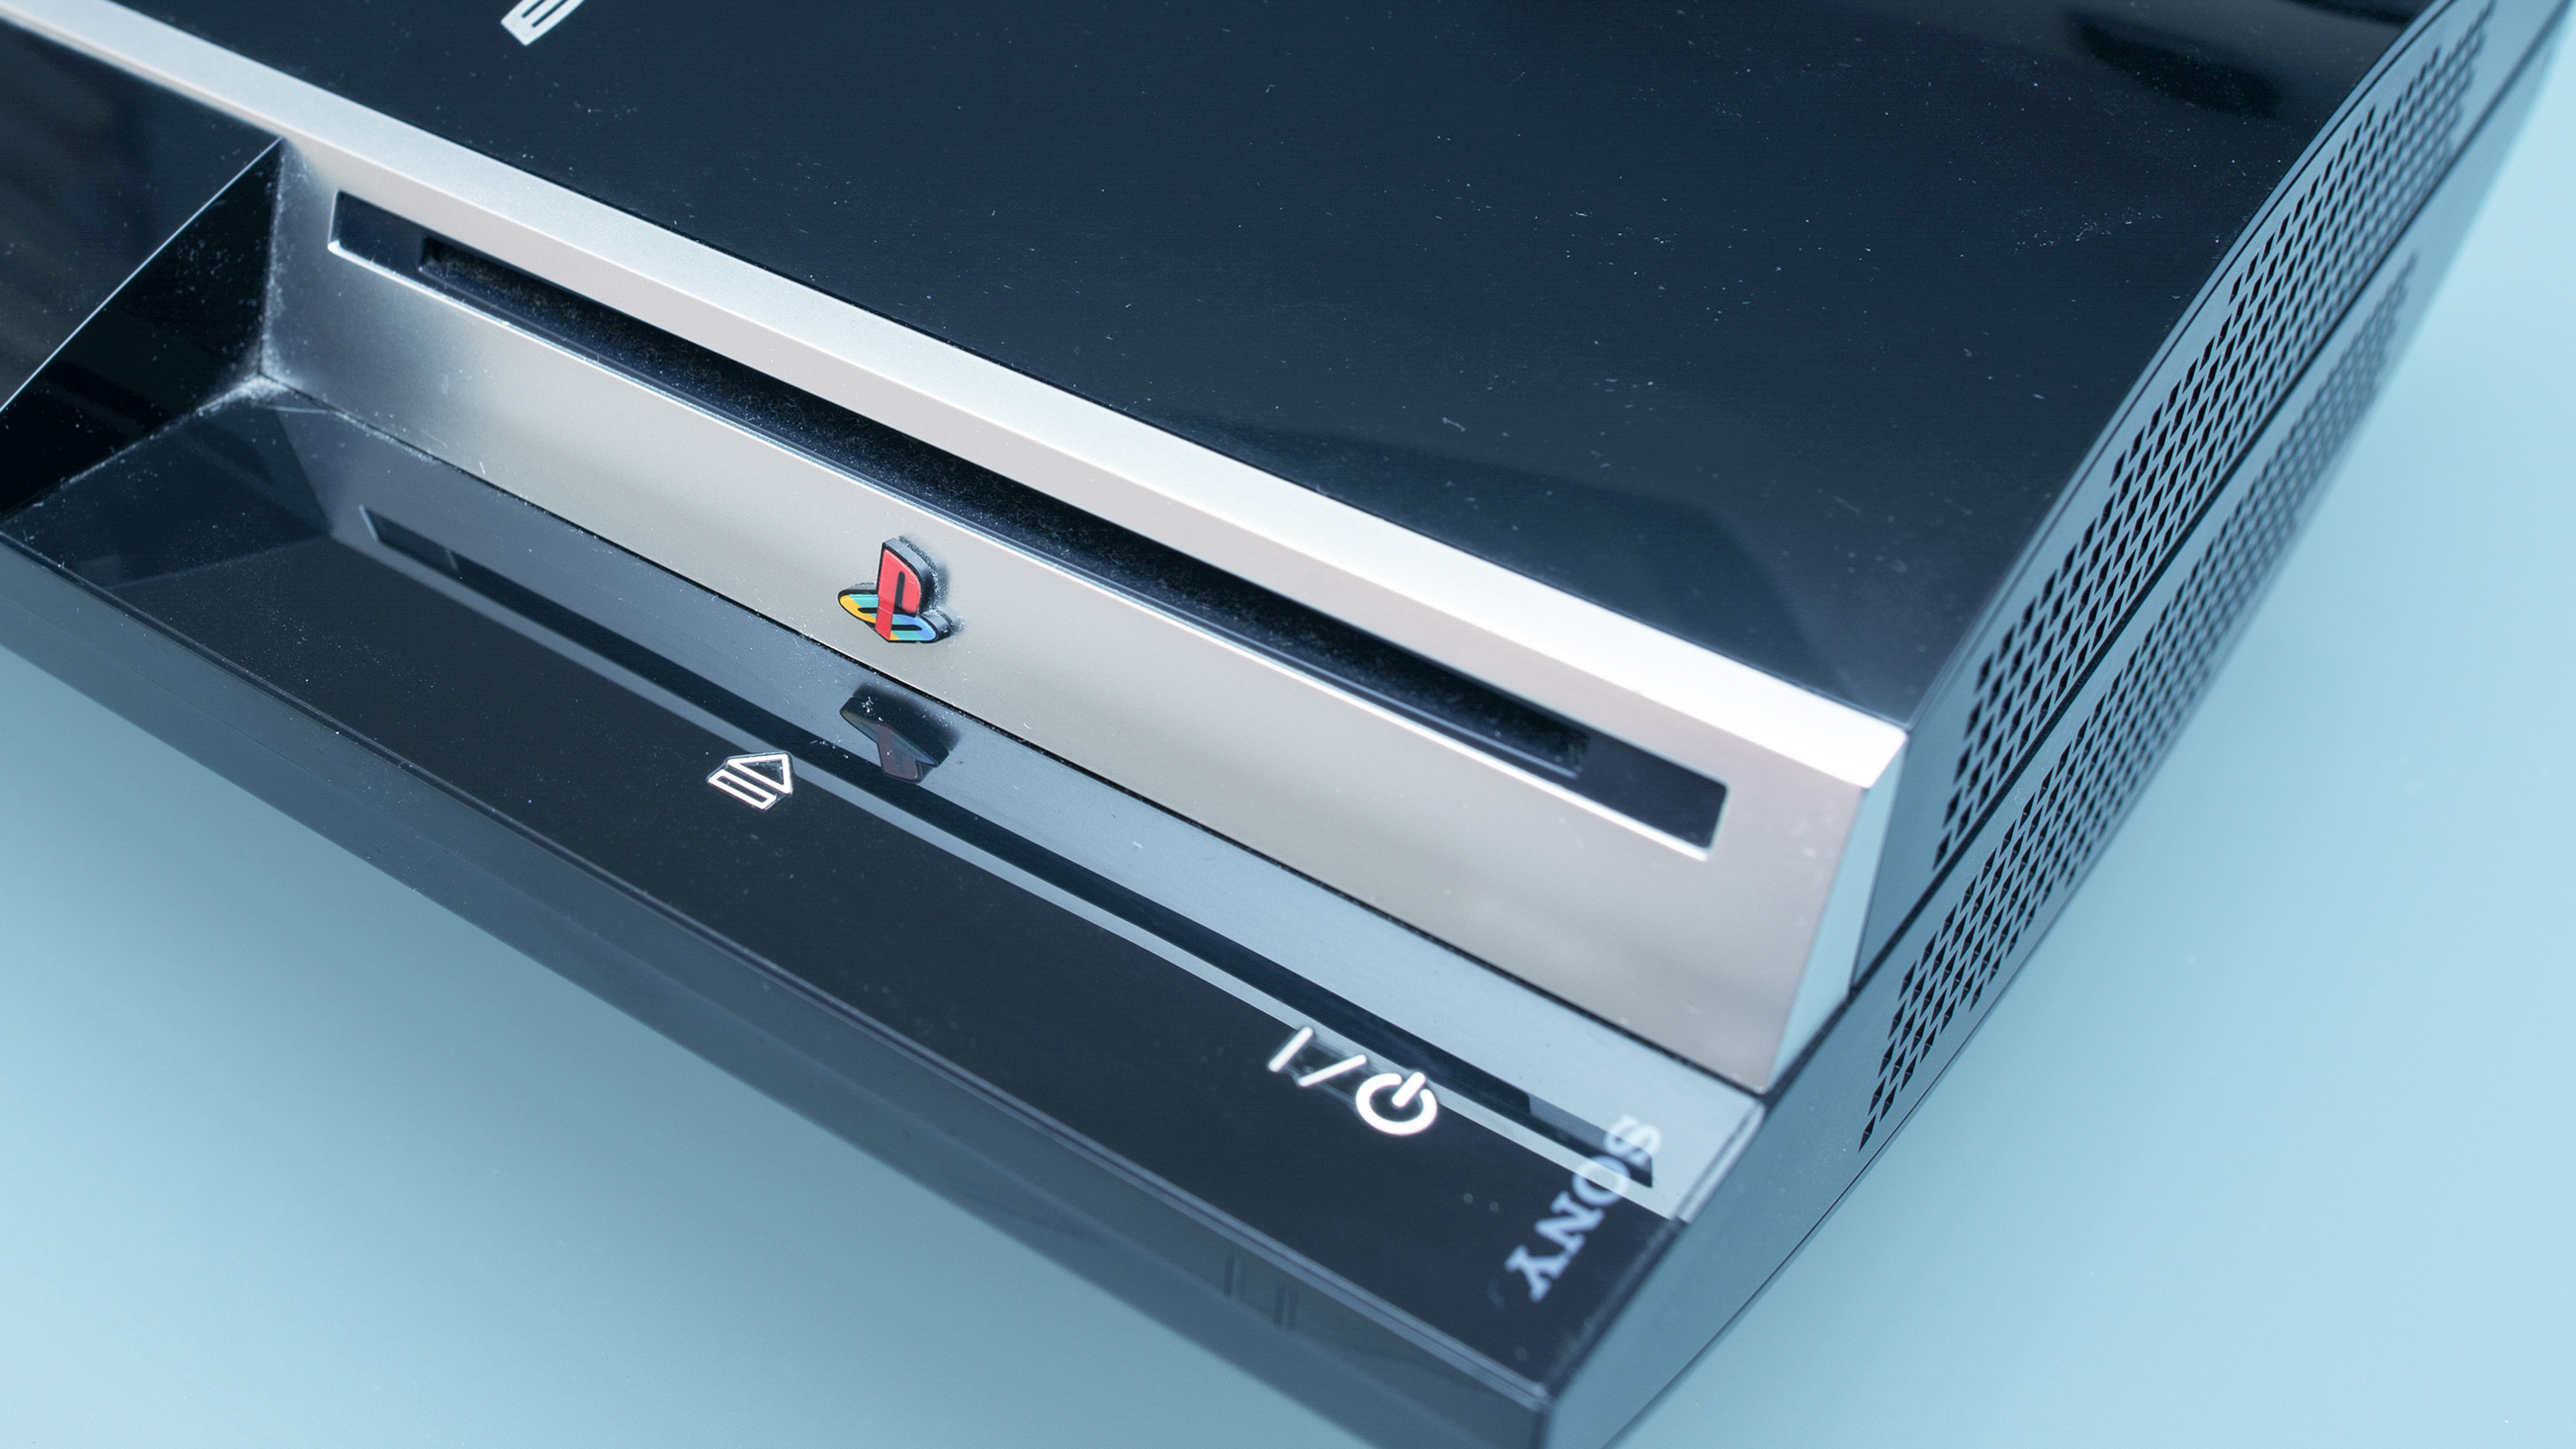 Sony reverses course, will keep PlayStation Store for PS3 and PS